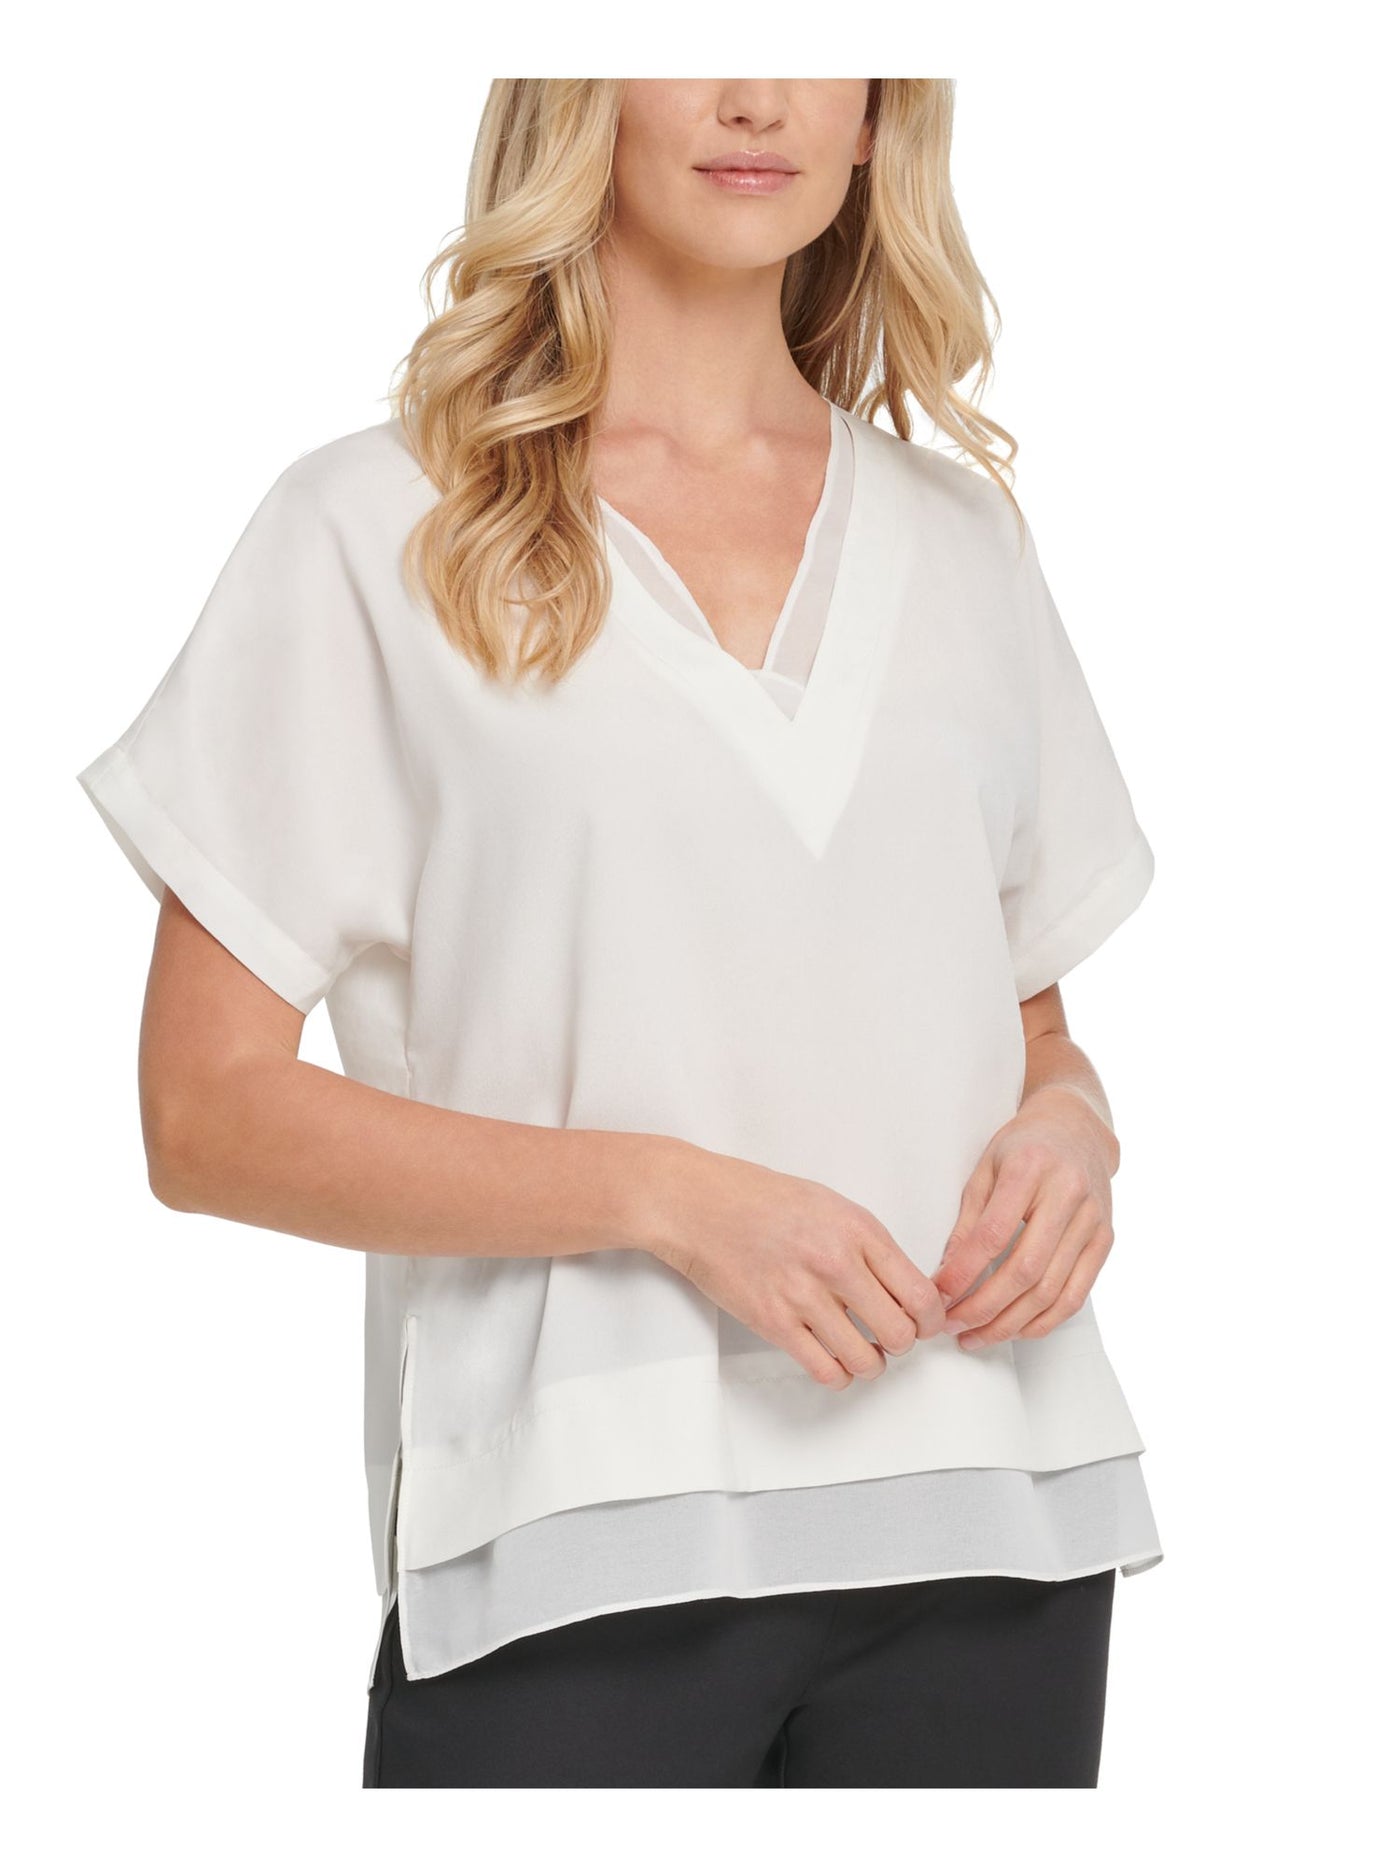 DKNY Womens White Short Sleeve V Neck Wear To Work Top S